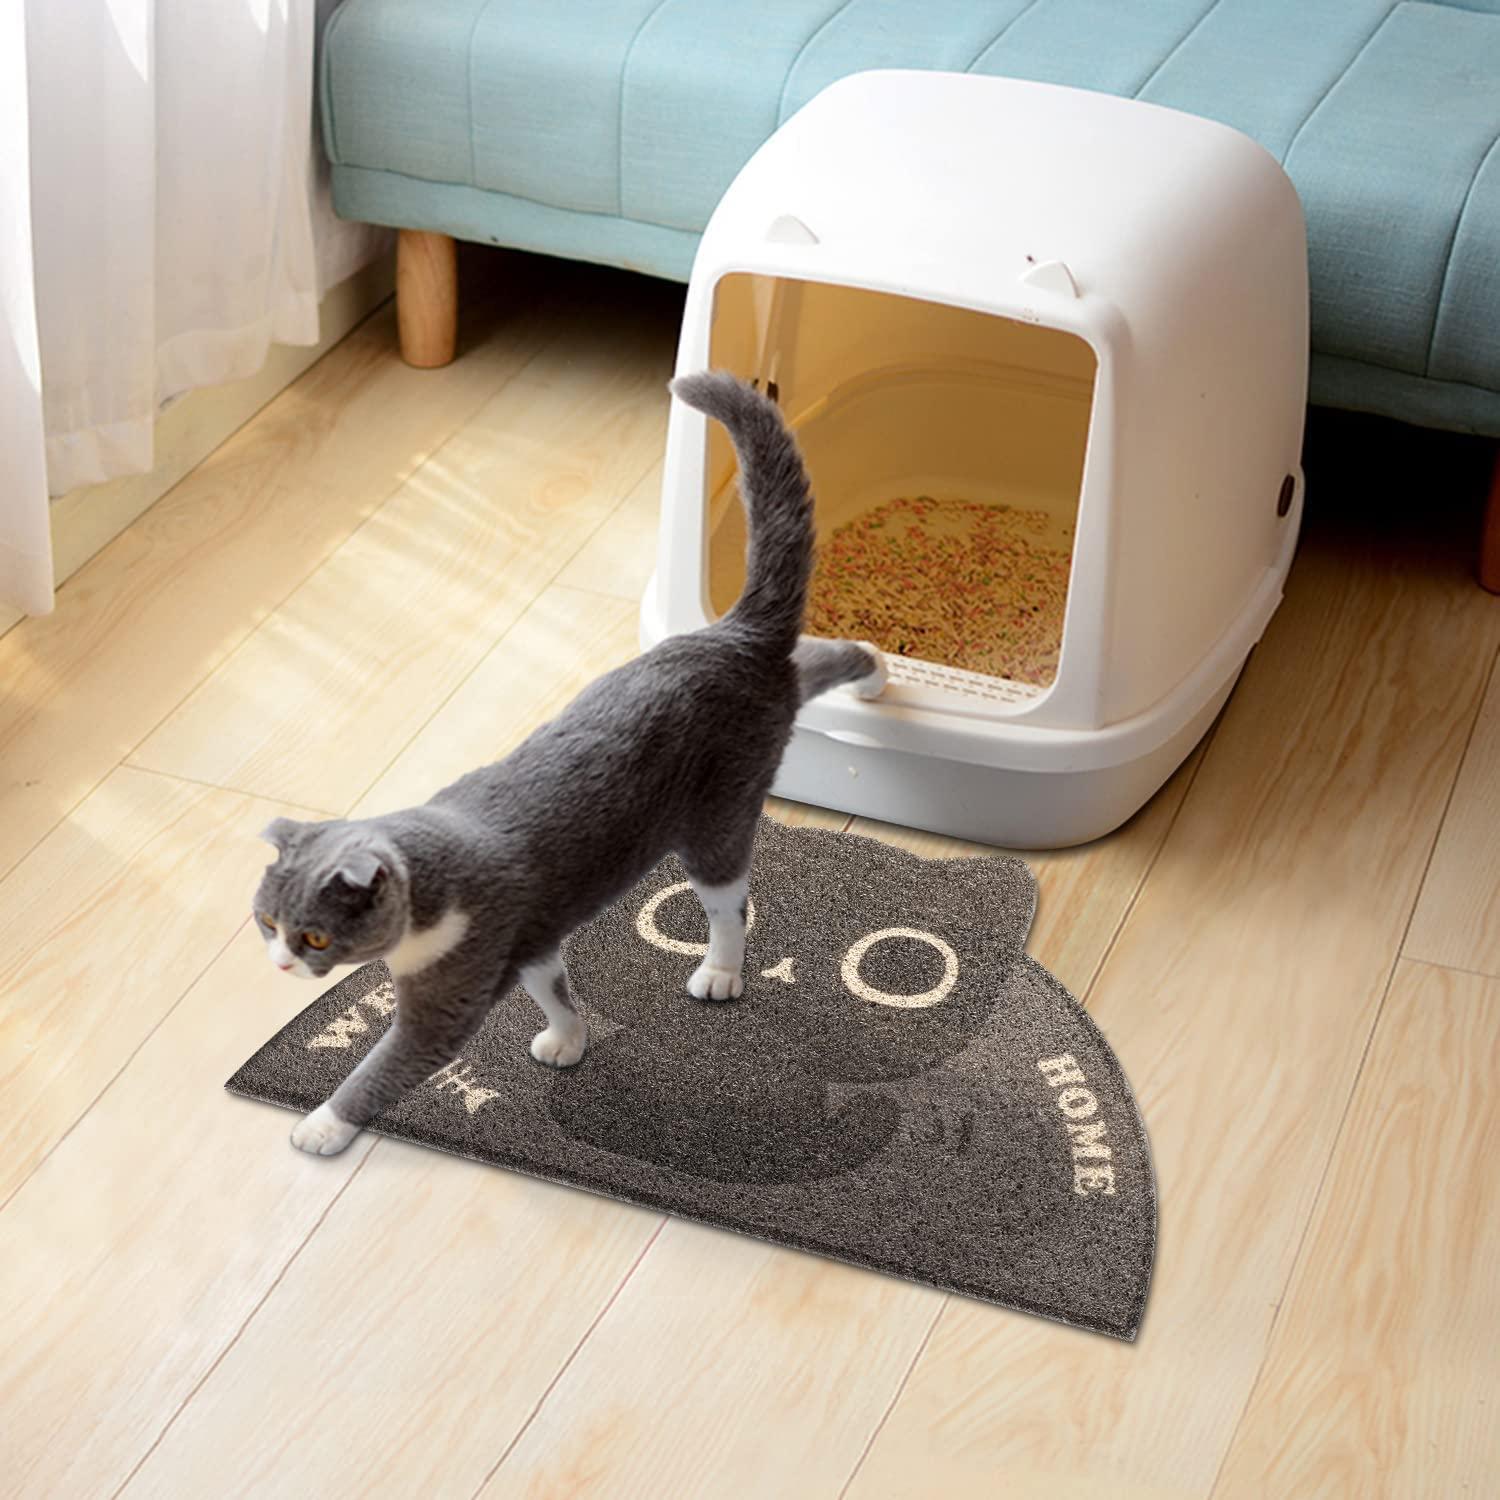 The Nice & Tidy Cat Food & Water Feeding Mat / Your Cat Backpack